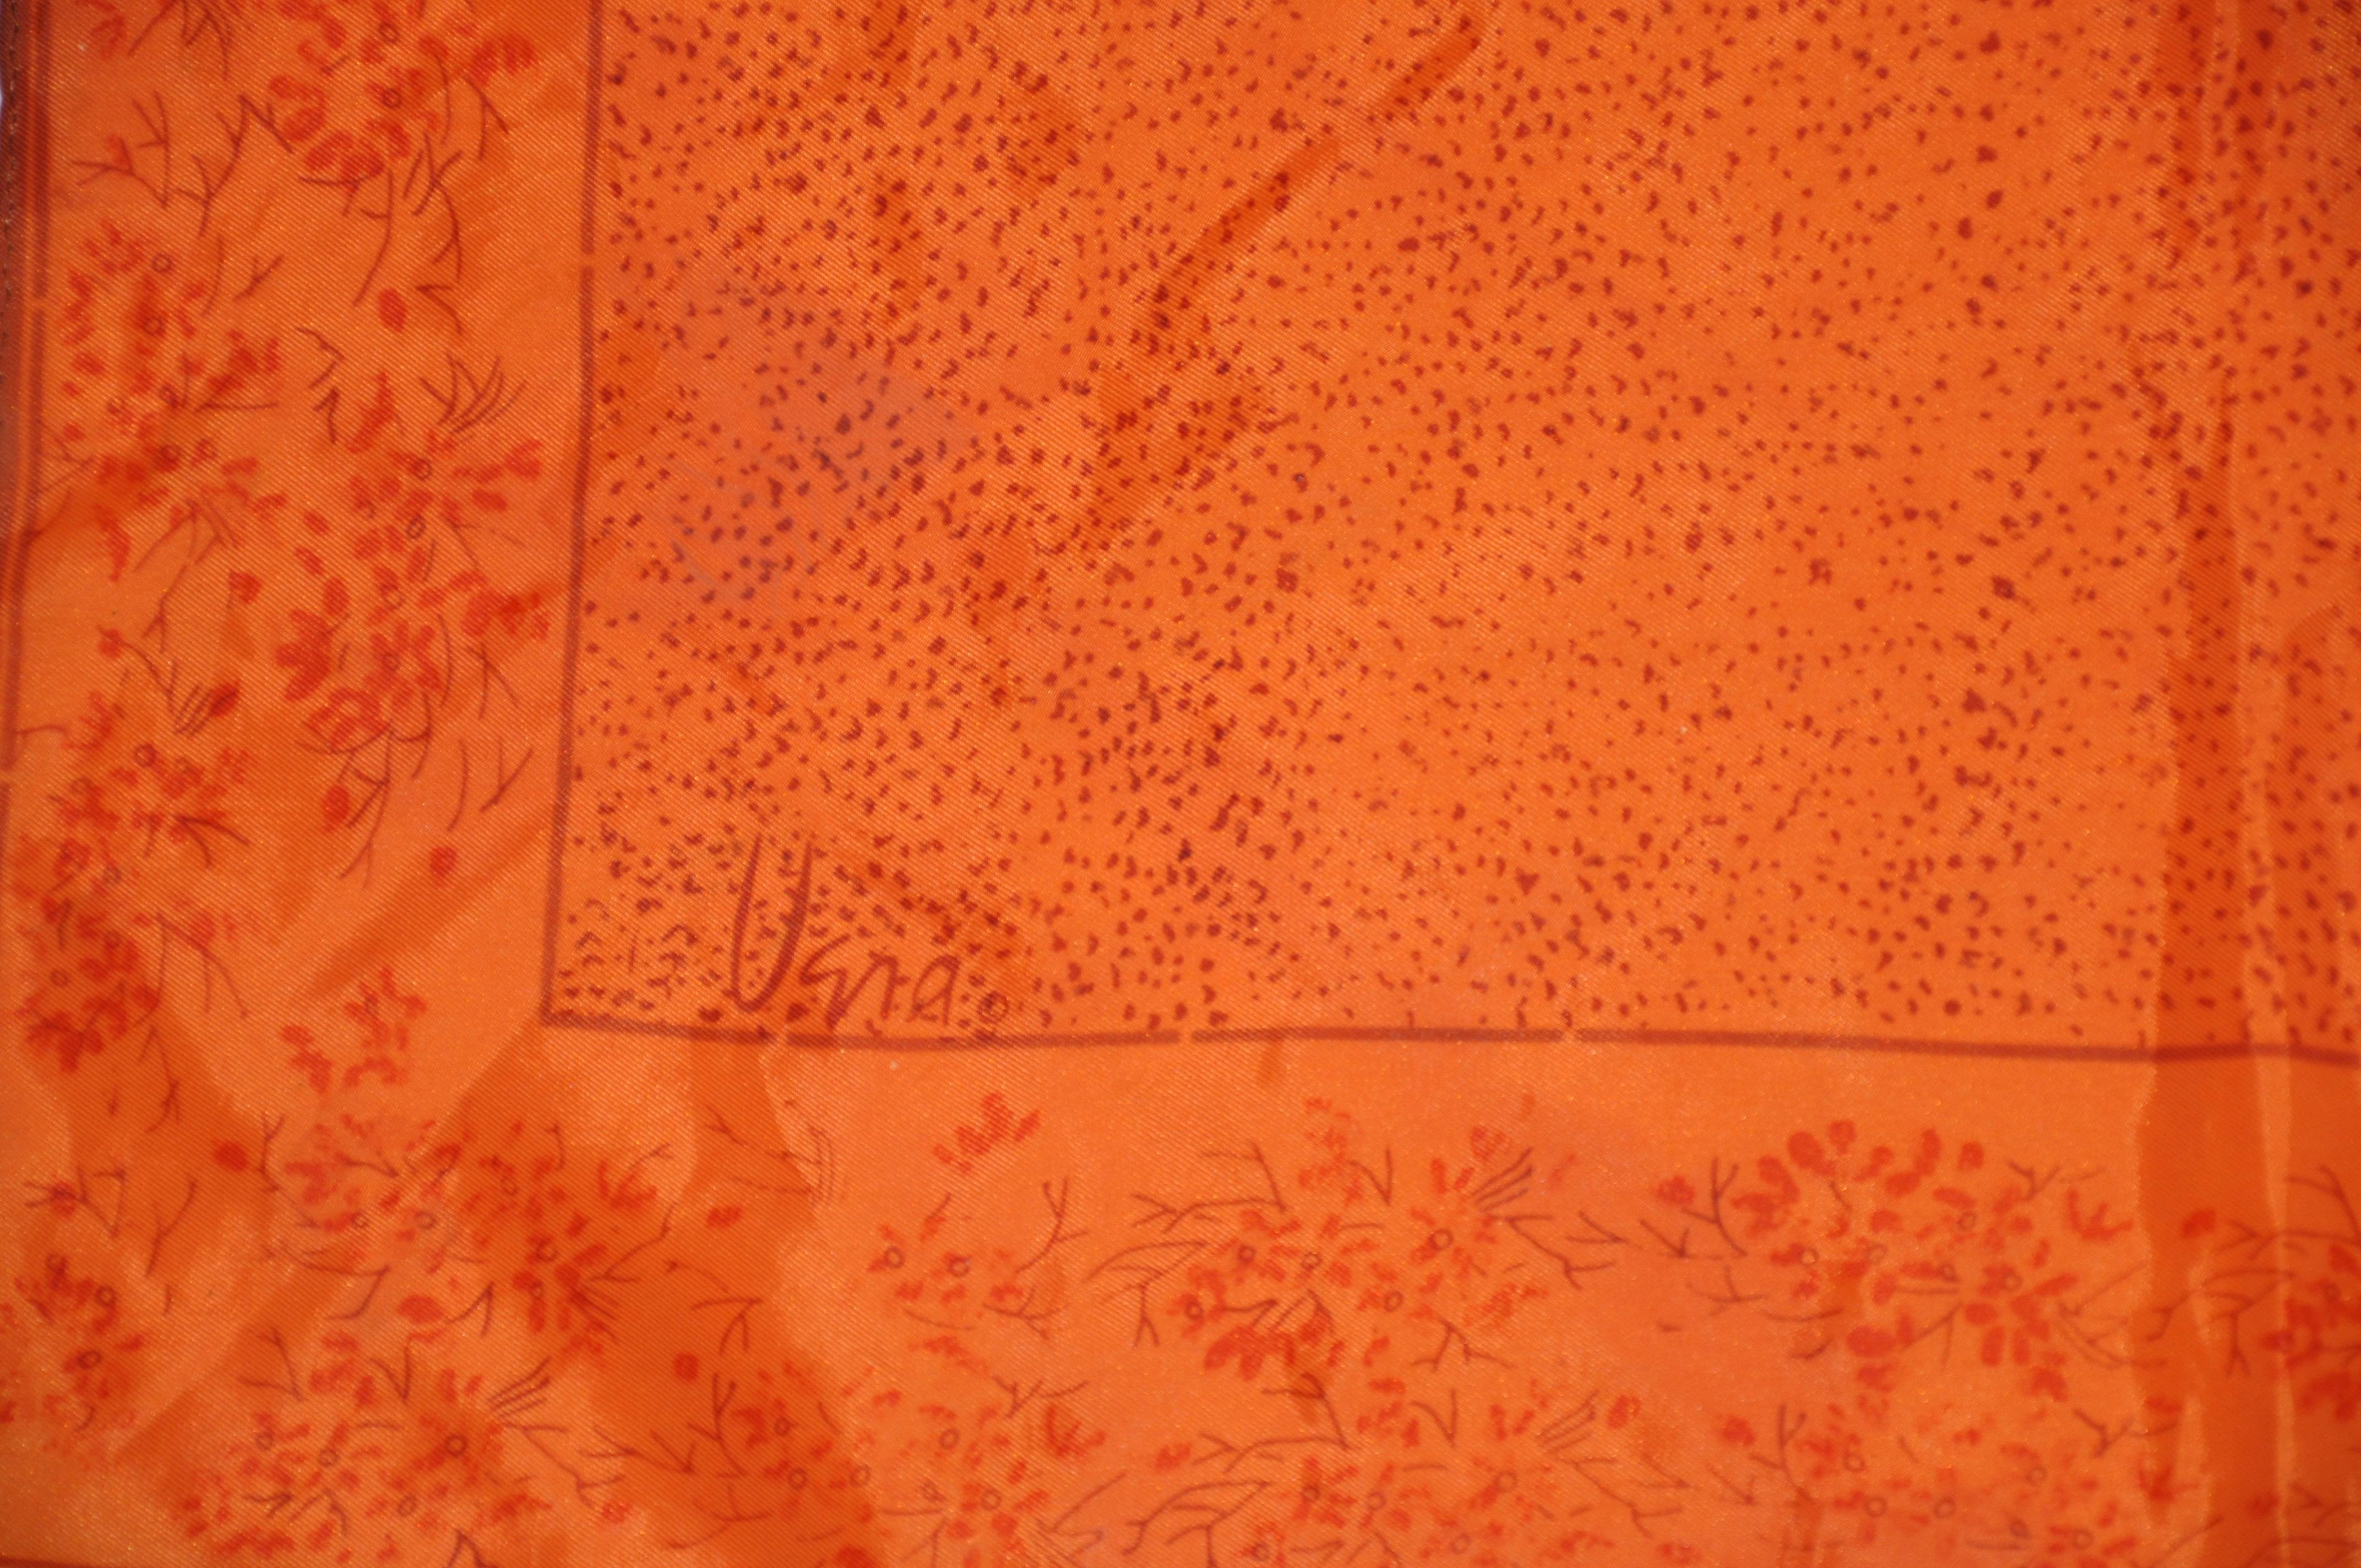        Vera warm tangerine with scattered floral borders acetate scarf measures 22 inches by 22 inches. Made in Japan.